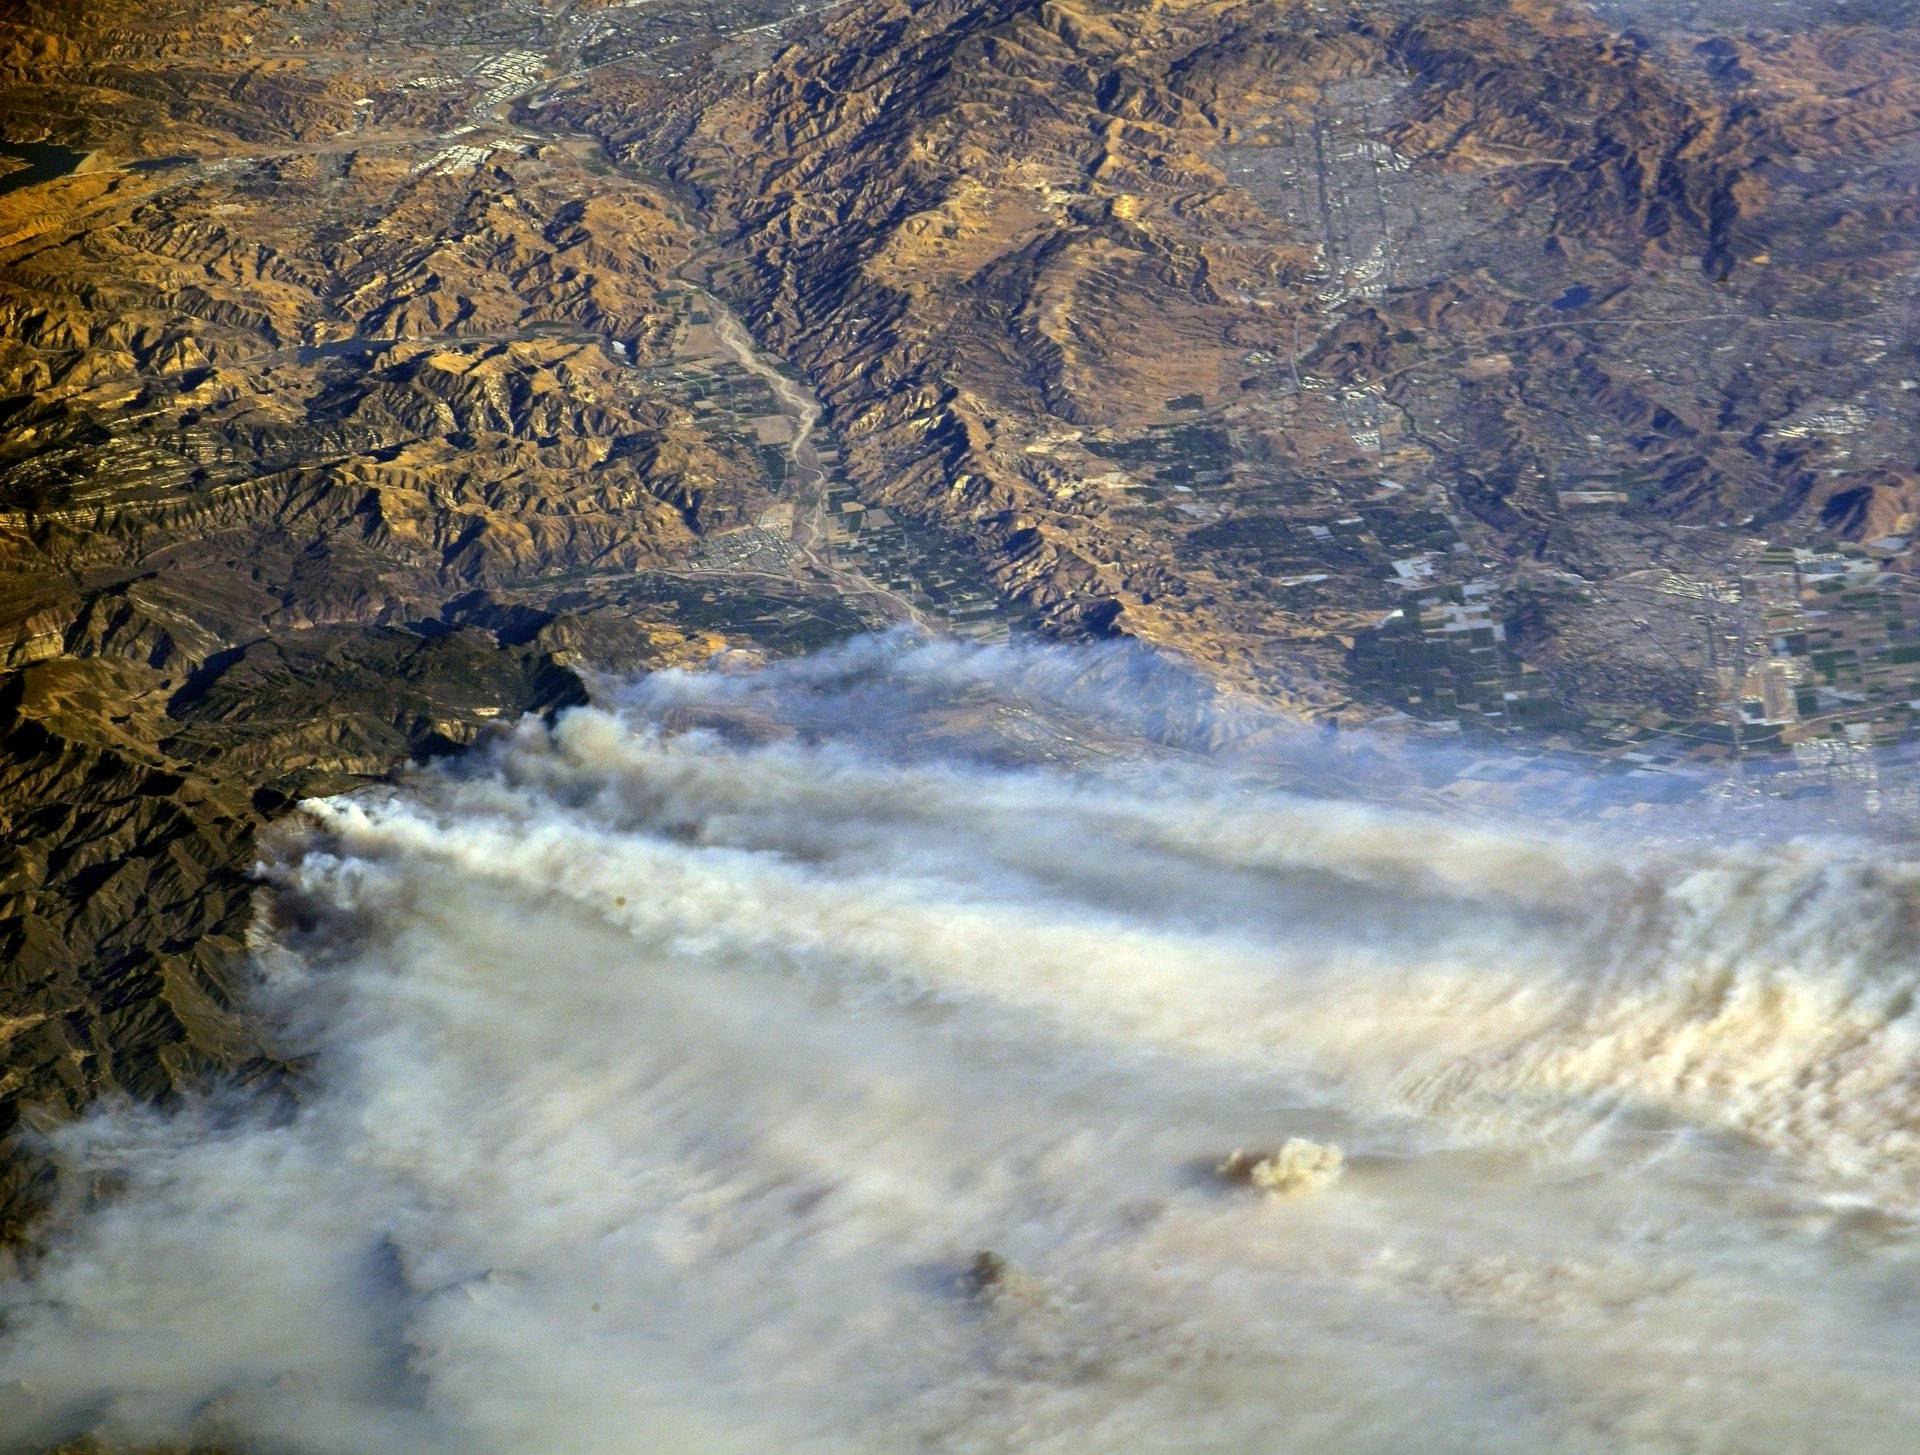 A photo taken from the International Space Station shows smoke rising from wildfire burning in Southern California